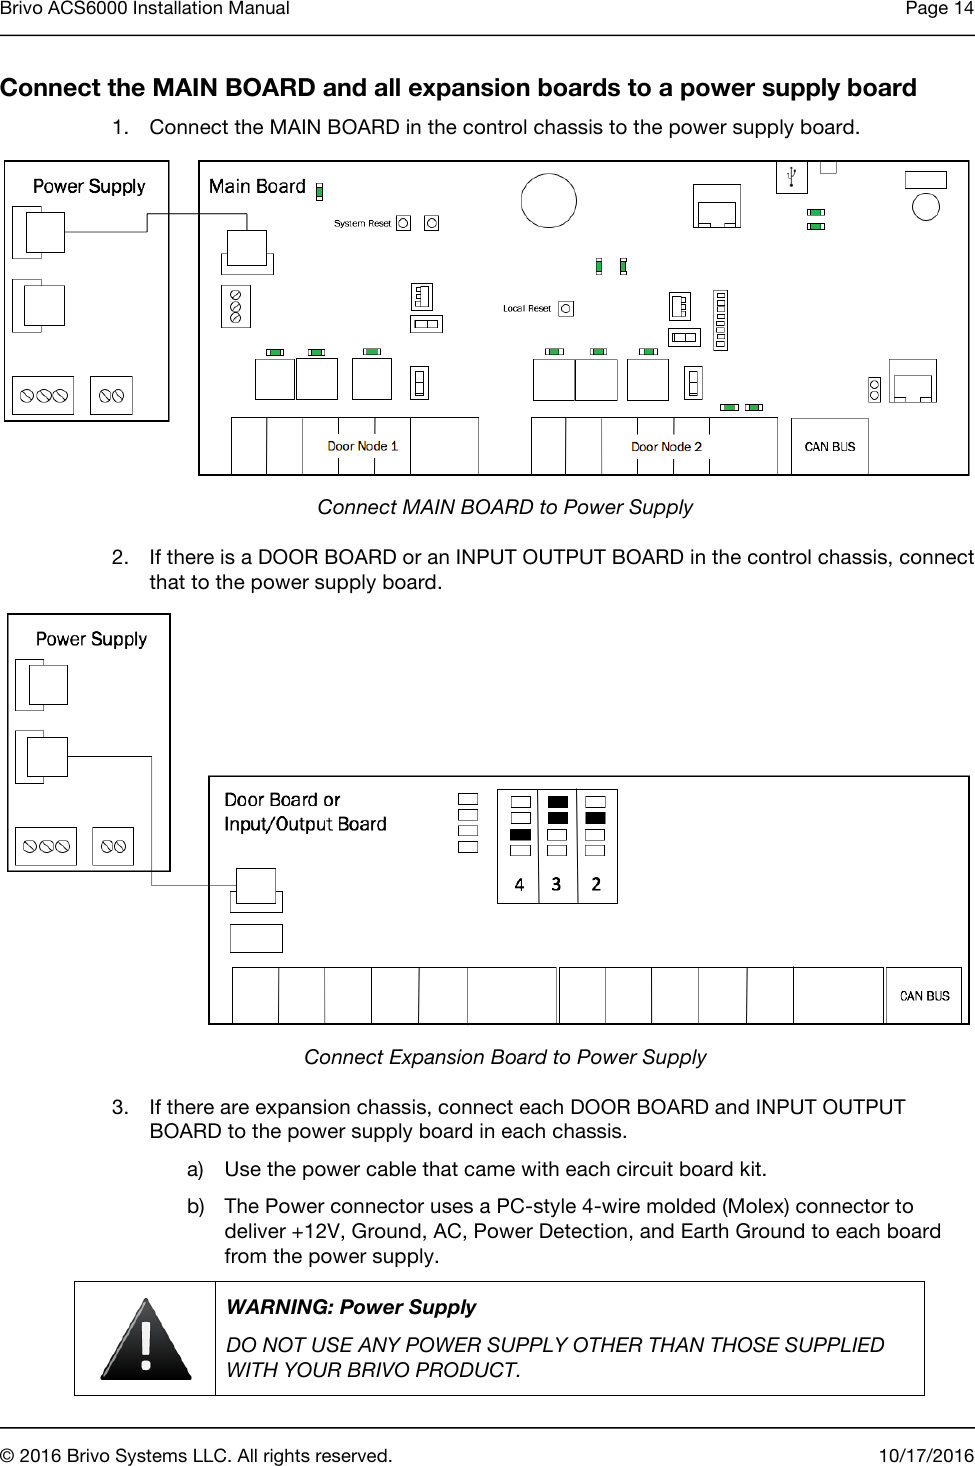 Brivo ACS6000 Installation Manual Page 14       © 2016 Brivo Systems LLC. All rights reserved. 10/17/2016  Connect the MAIN BOARD and all expansion boards to a power supply board 1. Connect the MAIN BOARD in the control chassis to the power supply board.  Connect MAIN BOARD to Power Supply 2. If there is a DOOR BOARD or an INPUT OUTPUT BOARD in the control chassis, connect that to the power supply board.  Connect Expansion Board to Power Supply 3. If there are expansion chassis, connect each DOOR BOARD and INPUT OUTPUT BOARD to the power supply board in each chassis. a) Use the power cable that came with each circuit board kit. b) The Power connector uses a PC-style 4-wire molded (Molex) connector to deliver +12V, Ground, AC, Power Detection, and Earth Ground to each board from the power supply.  WARNING: Power Supply DO NOT USE ANY POWER SUPPLY OTHER THAN THOSE SUPPLIED WITH YOUR BRIVO PRODUCT. 